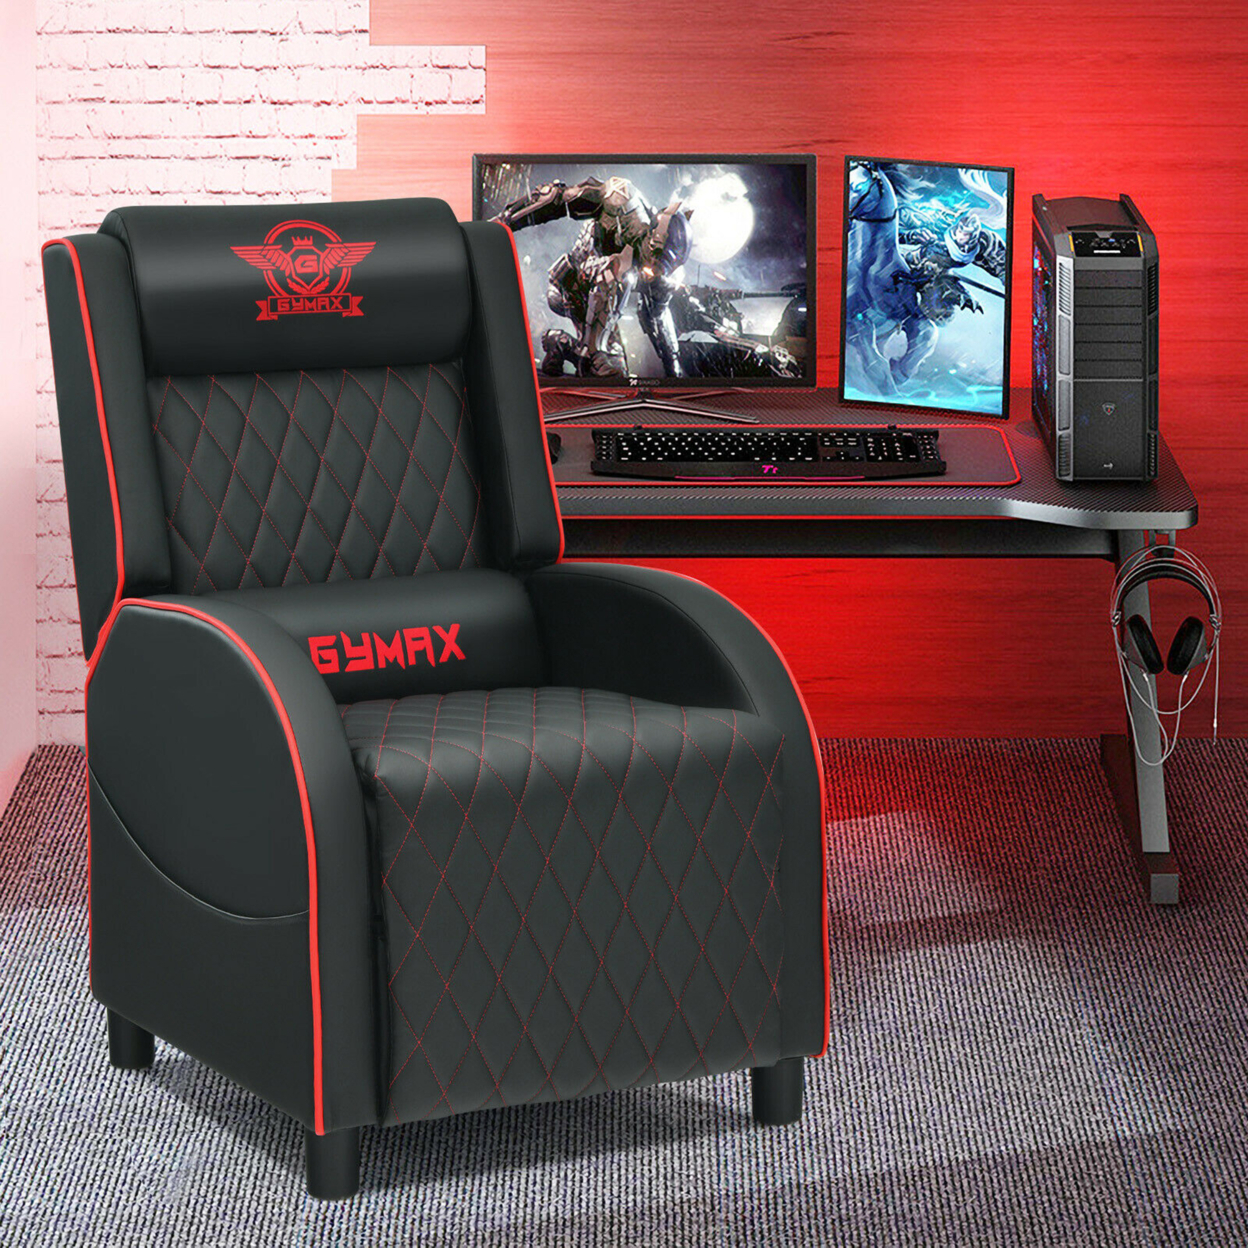 Gymax Massage Gaming Recliner Chair Leather Single Sofa Home Theater Seat